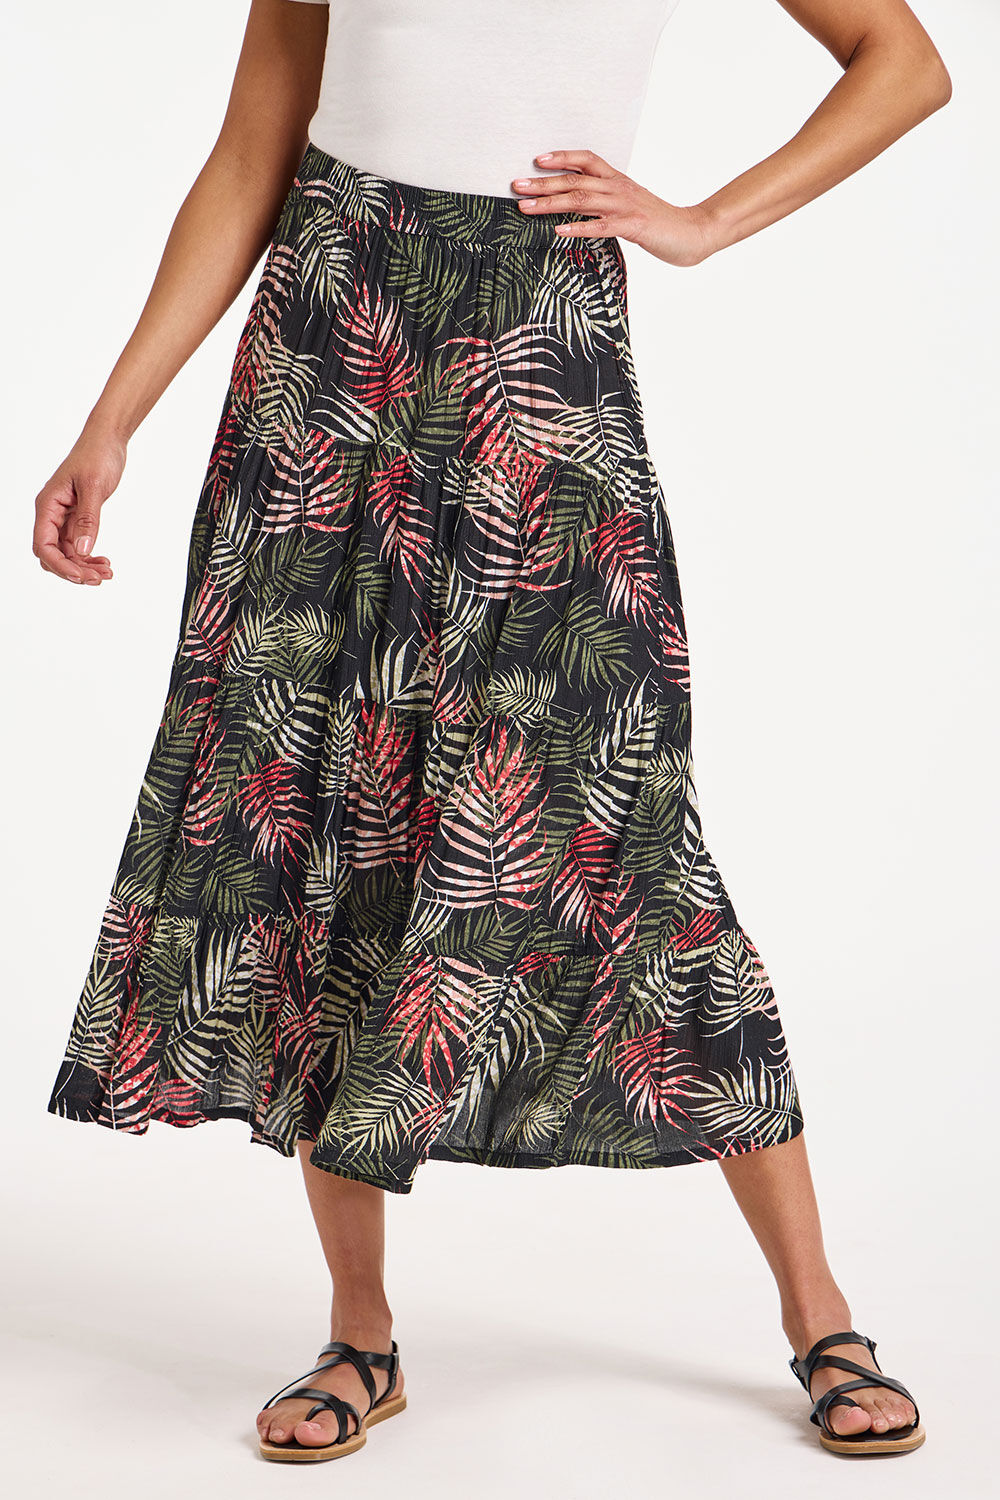 Bonmarche Black Palm Print Crinkle Tiered Elasticated Skirt, Size: 18